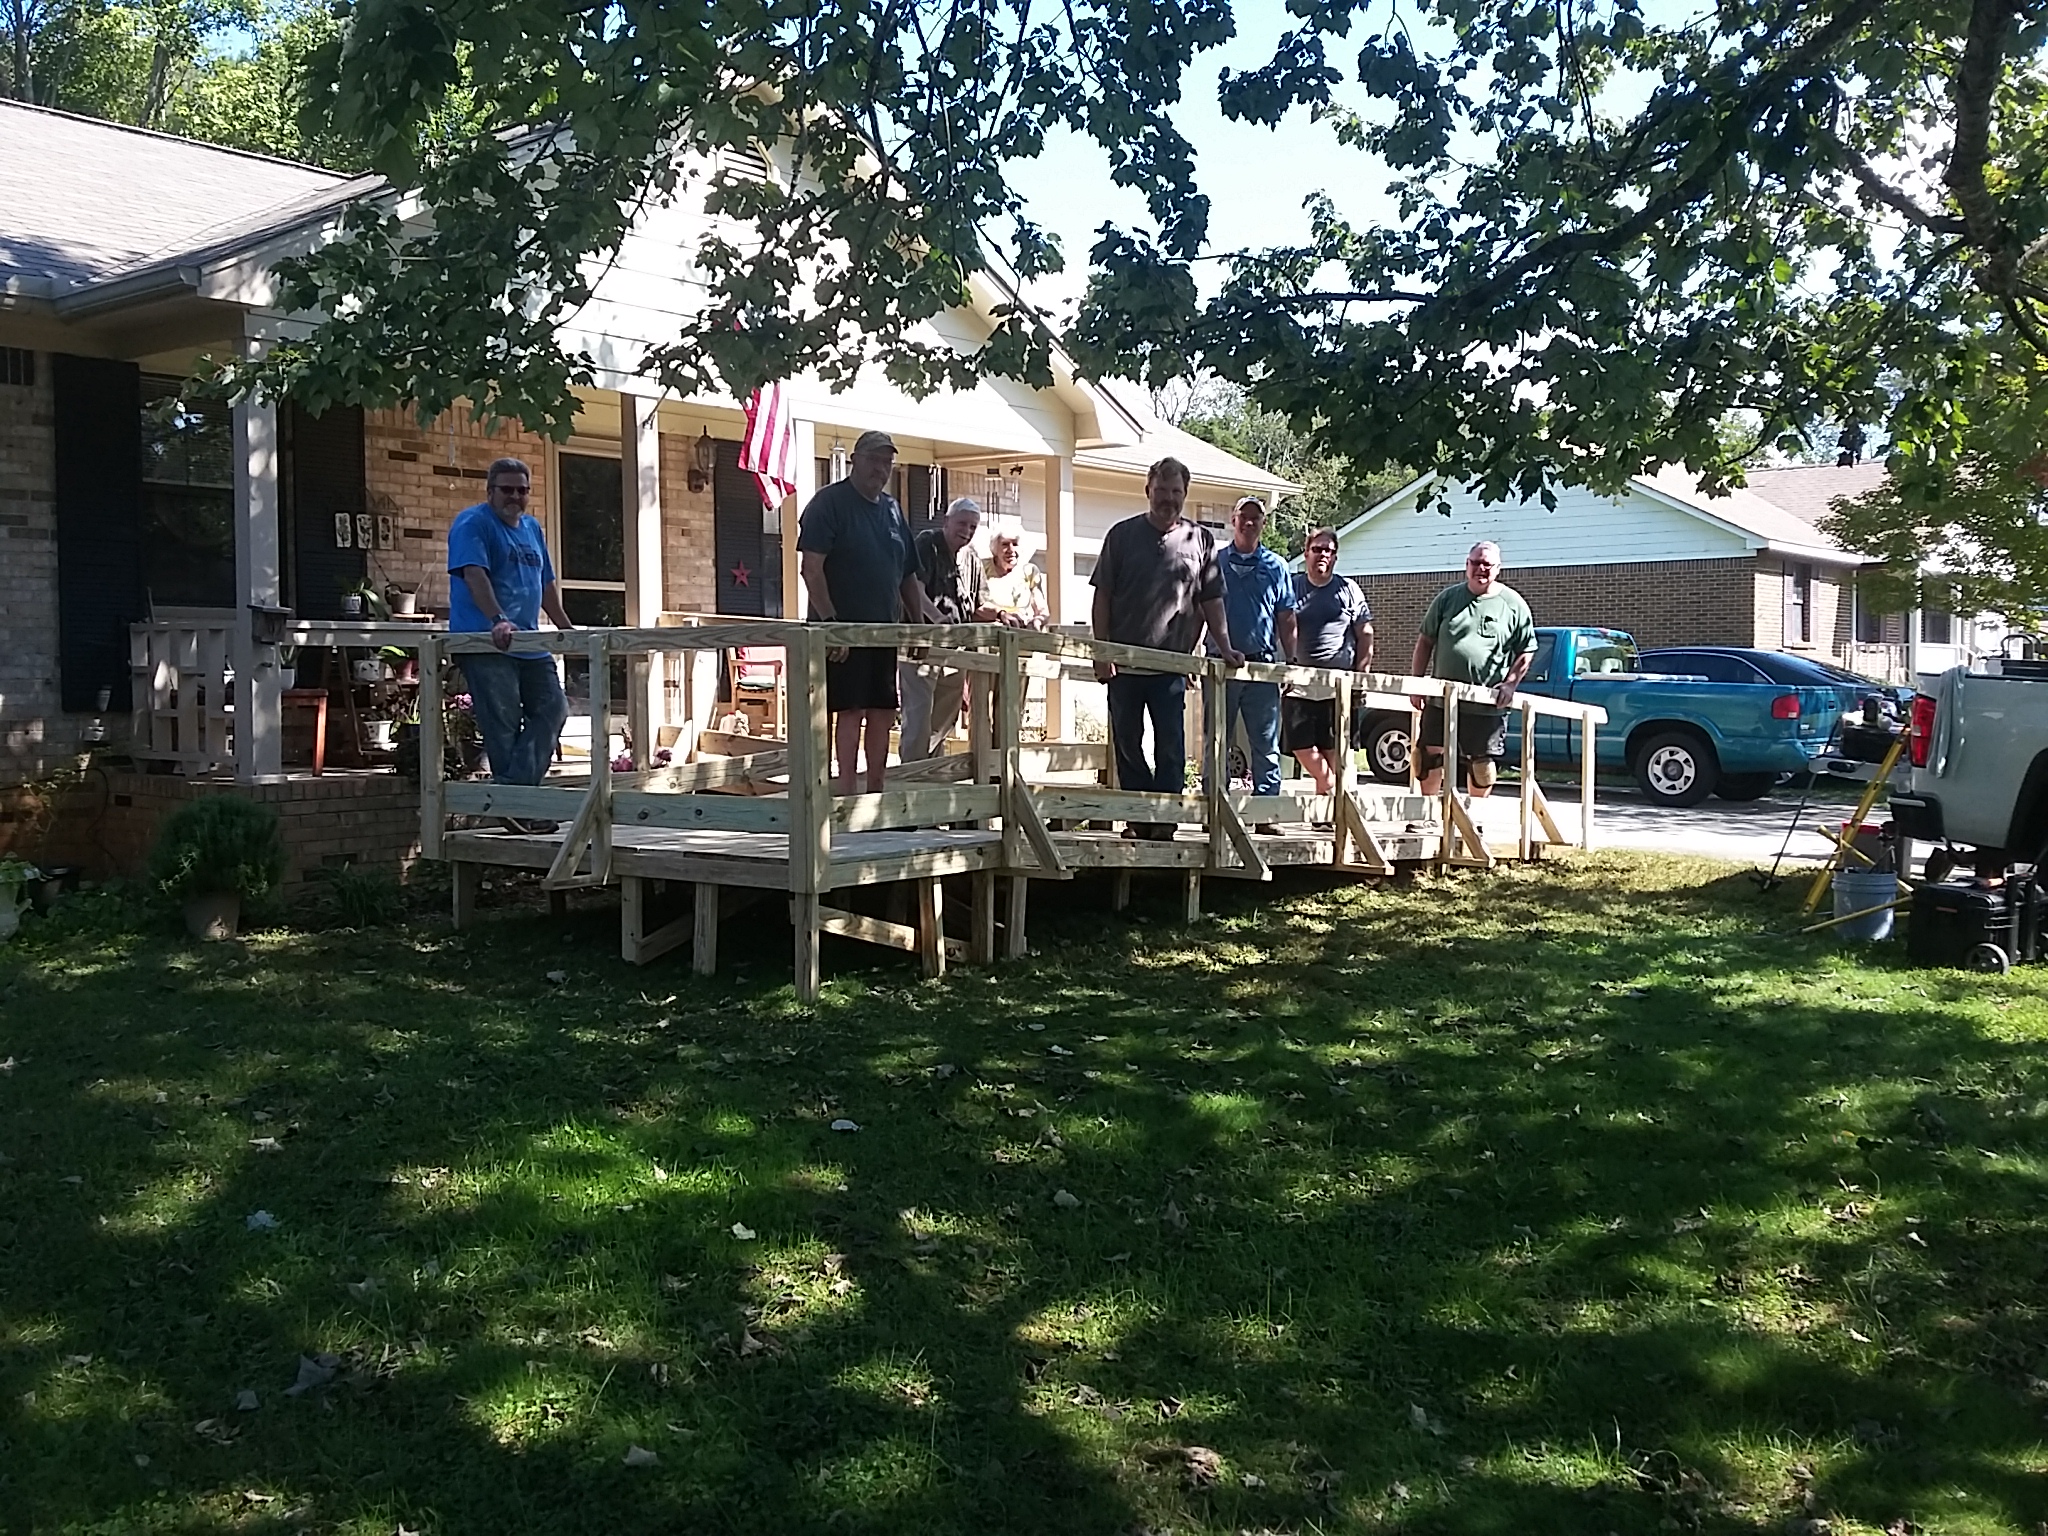 As part of the 2021 Combined Federal Campaign, Marshall volunteers built this wheelchair-accessible ramp for homeowners in Madison County.